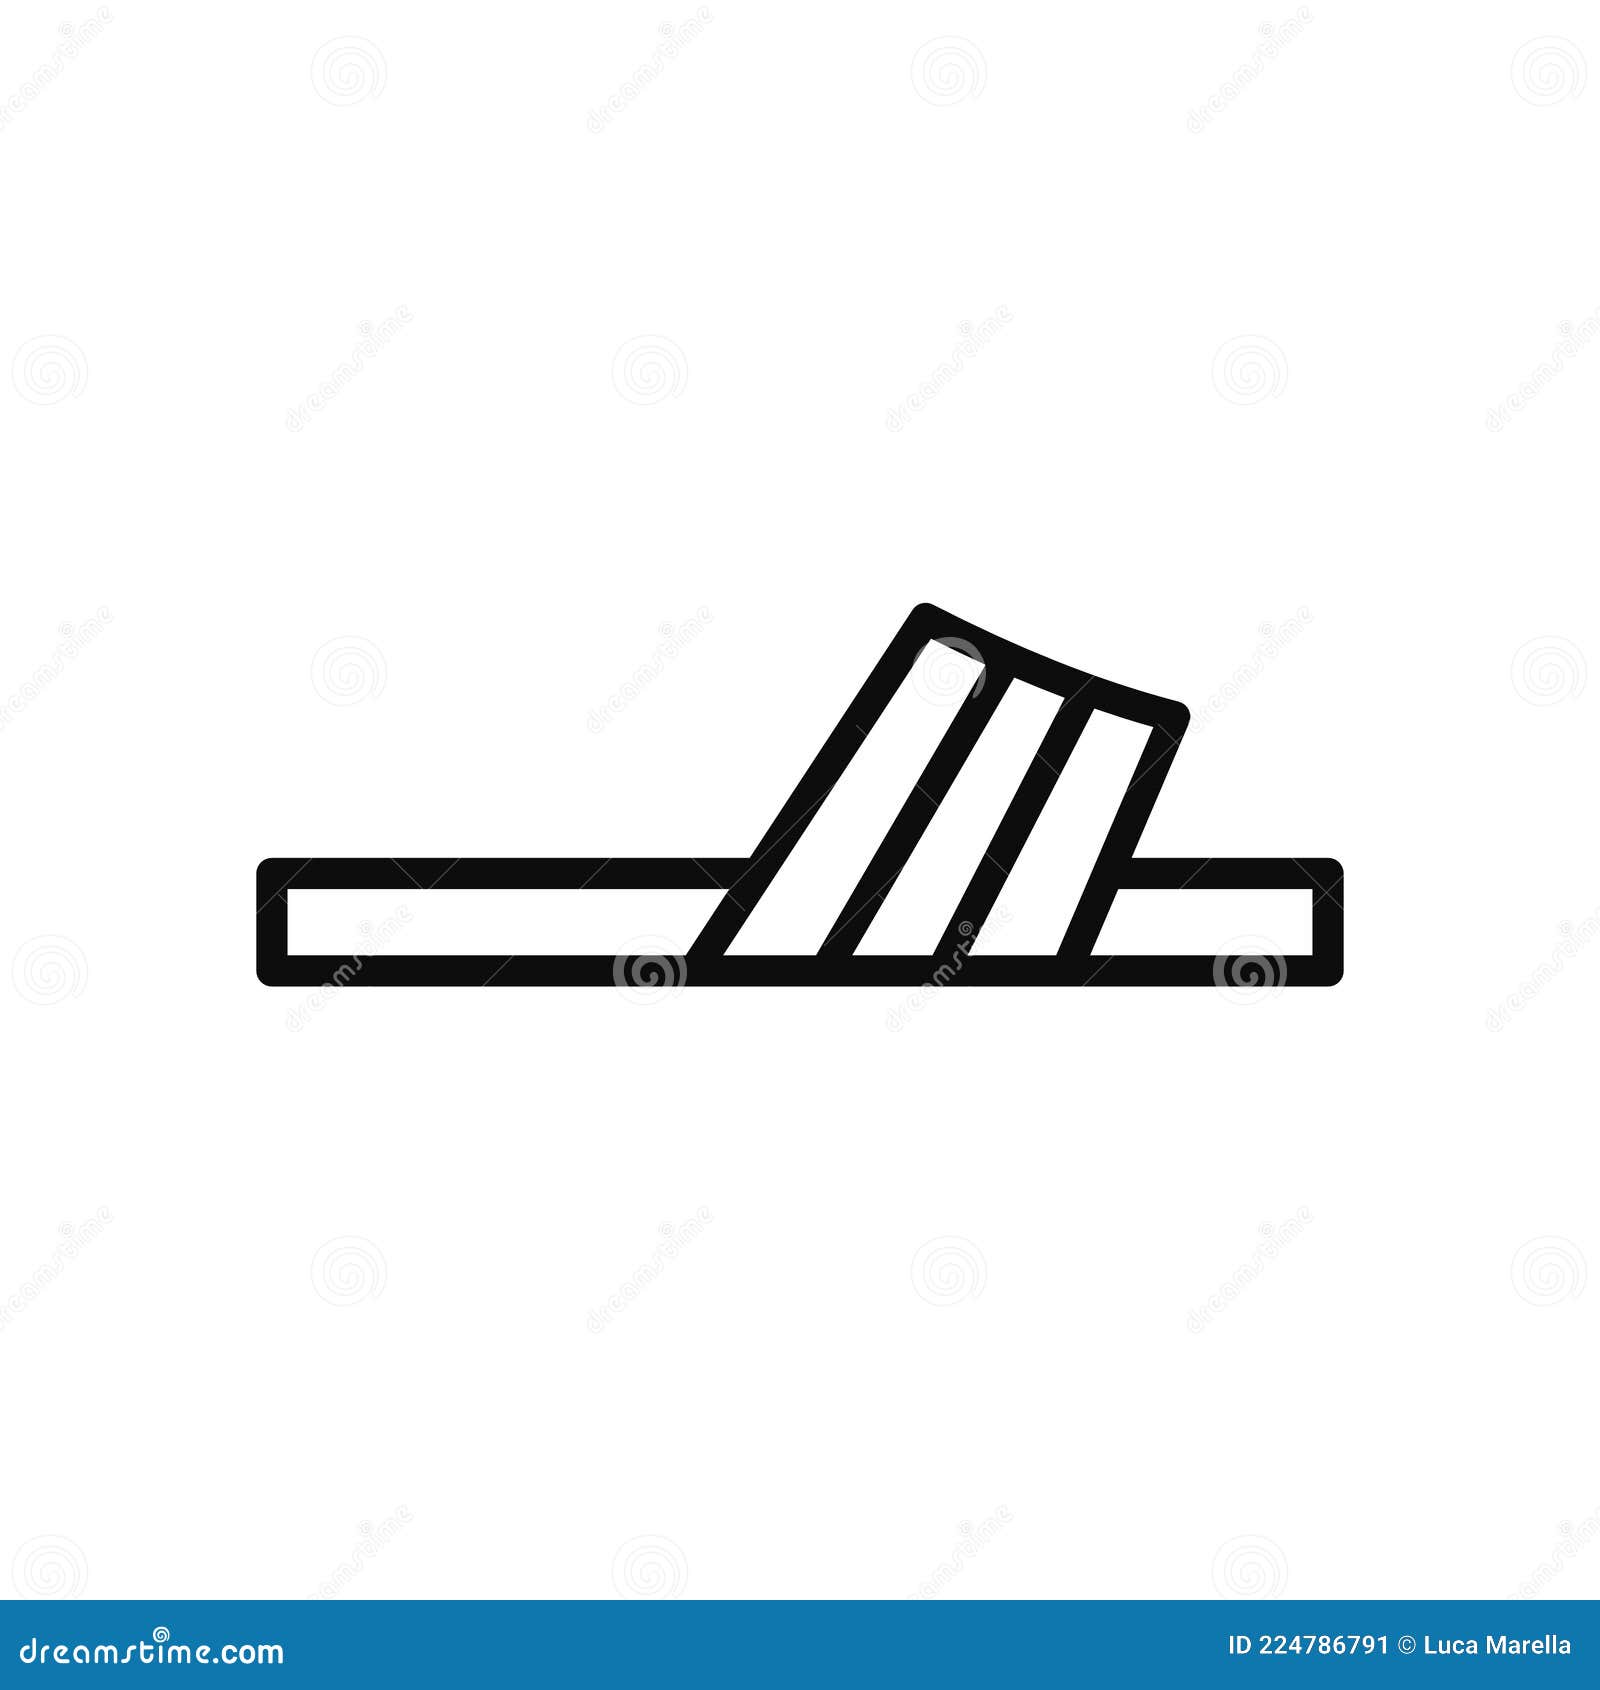 Shoes And Footwear Production Background Cartoon Vector | CartoonDealer ...